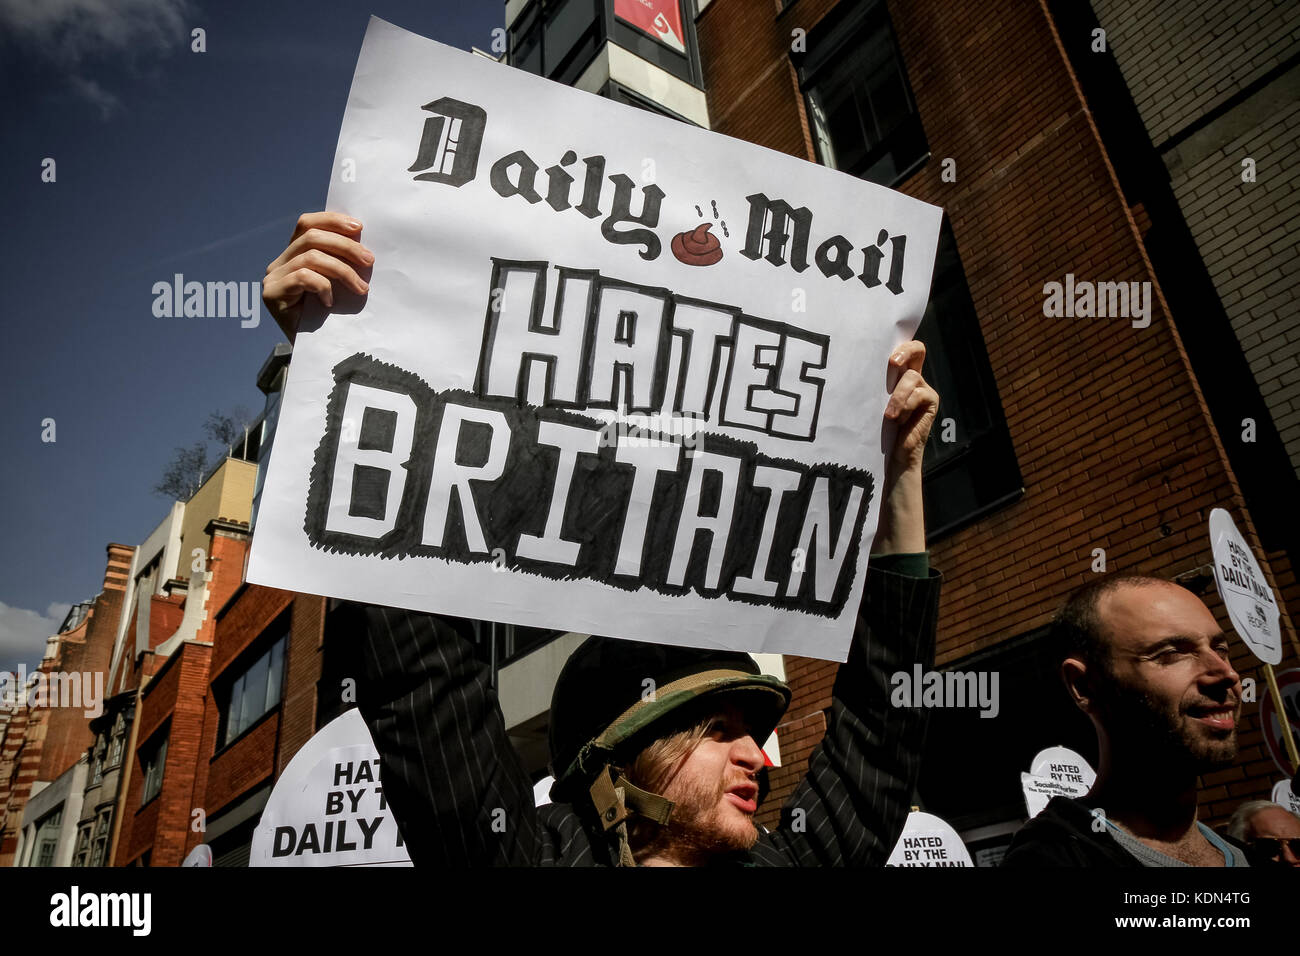 Protesters outside Daily Mail newspaper head offices in London, UK Stock Photo